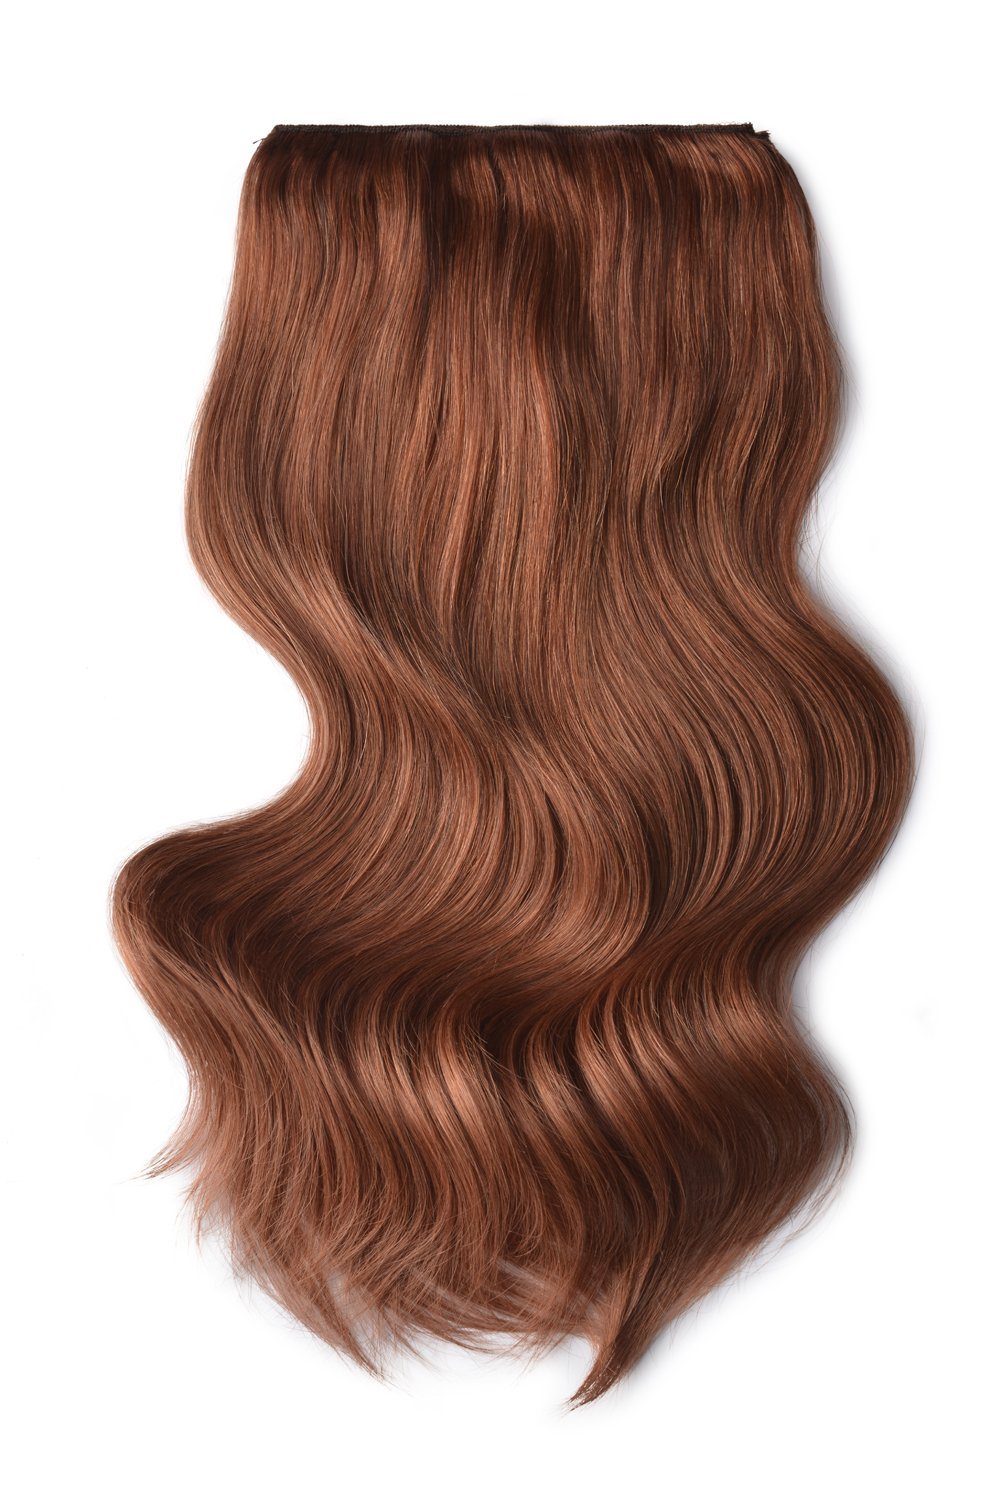 Double Wefted Full Head Remy Clip In Human Hair Extensions Dark Auburn Copper Red 33